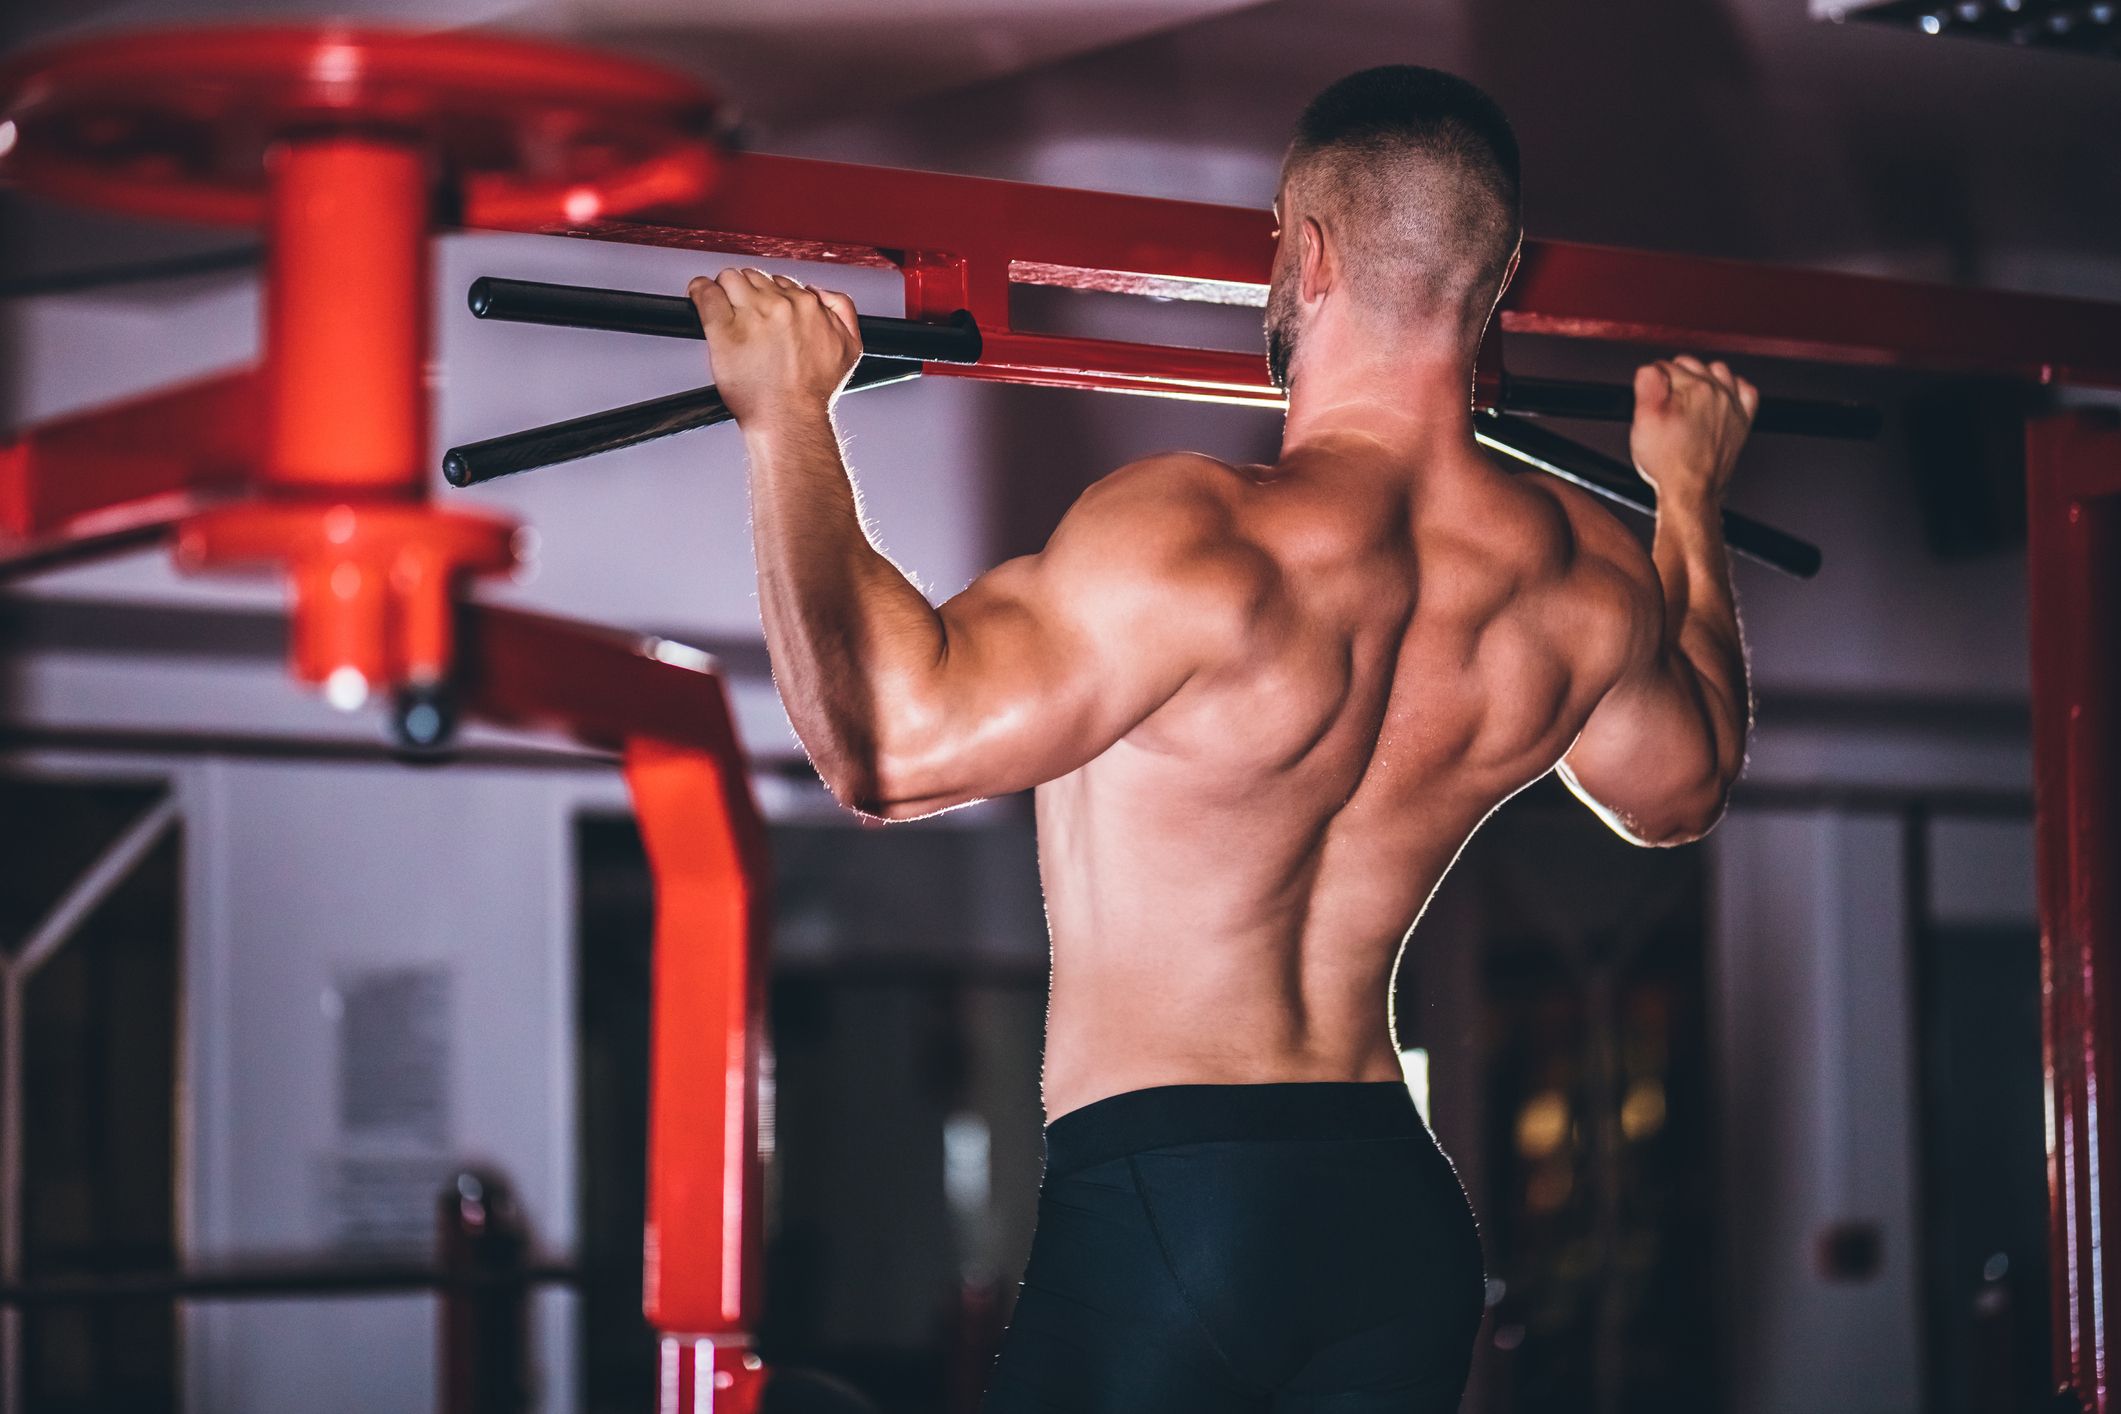 back muscle exercises for men